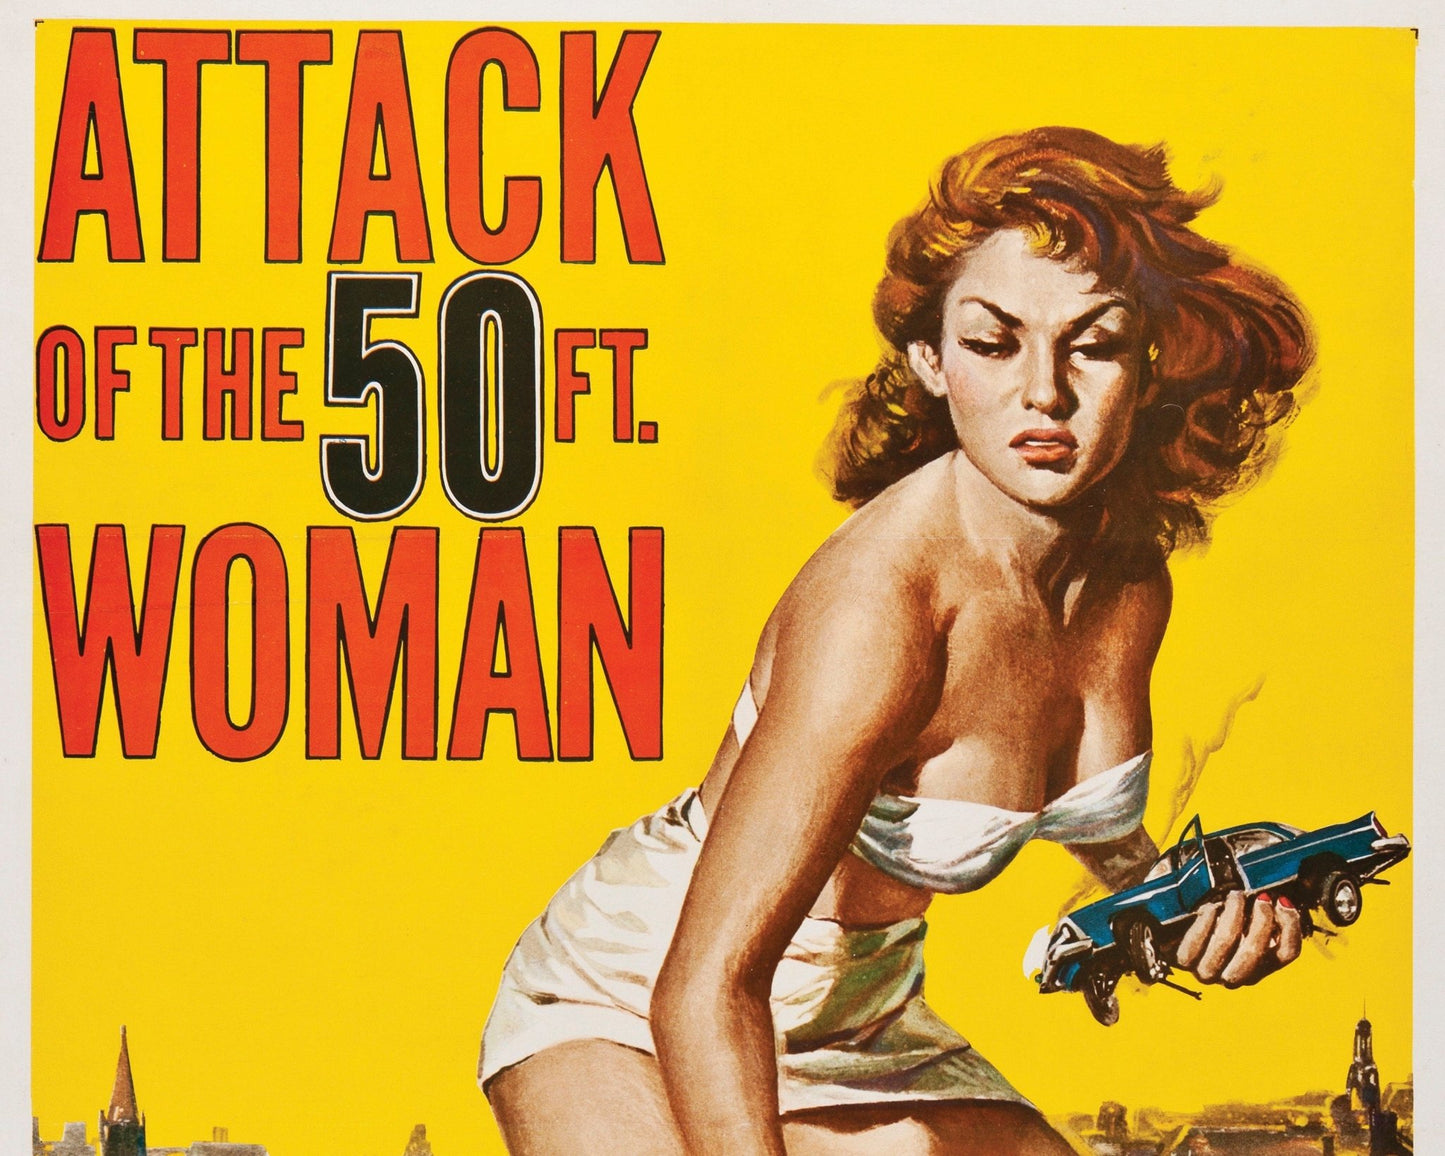 Vintage Movie Poster "Attack of the 50ft Woman" (1958) - Mabon Gallery